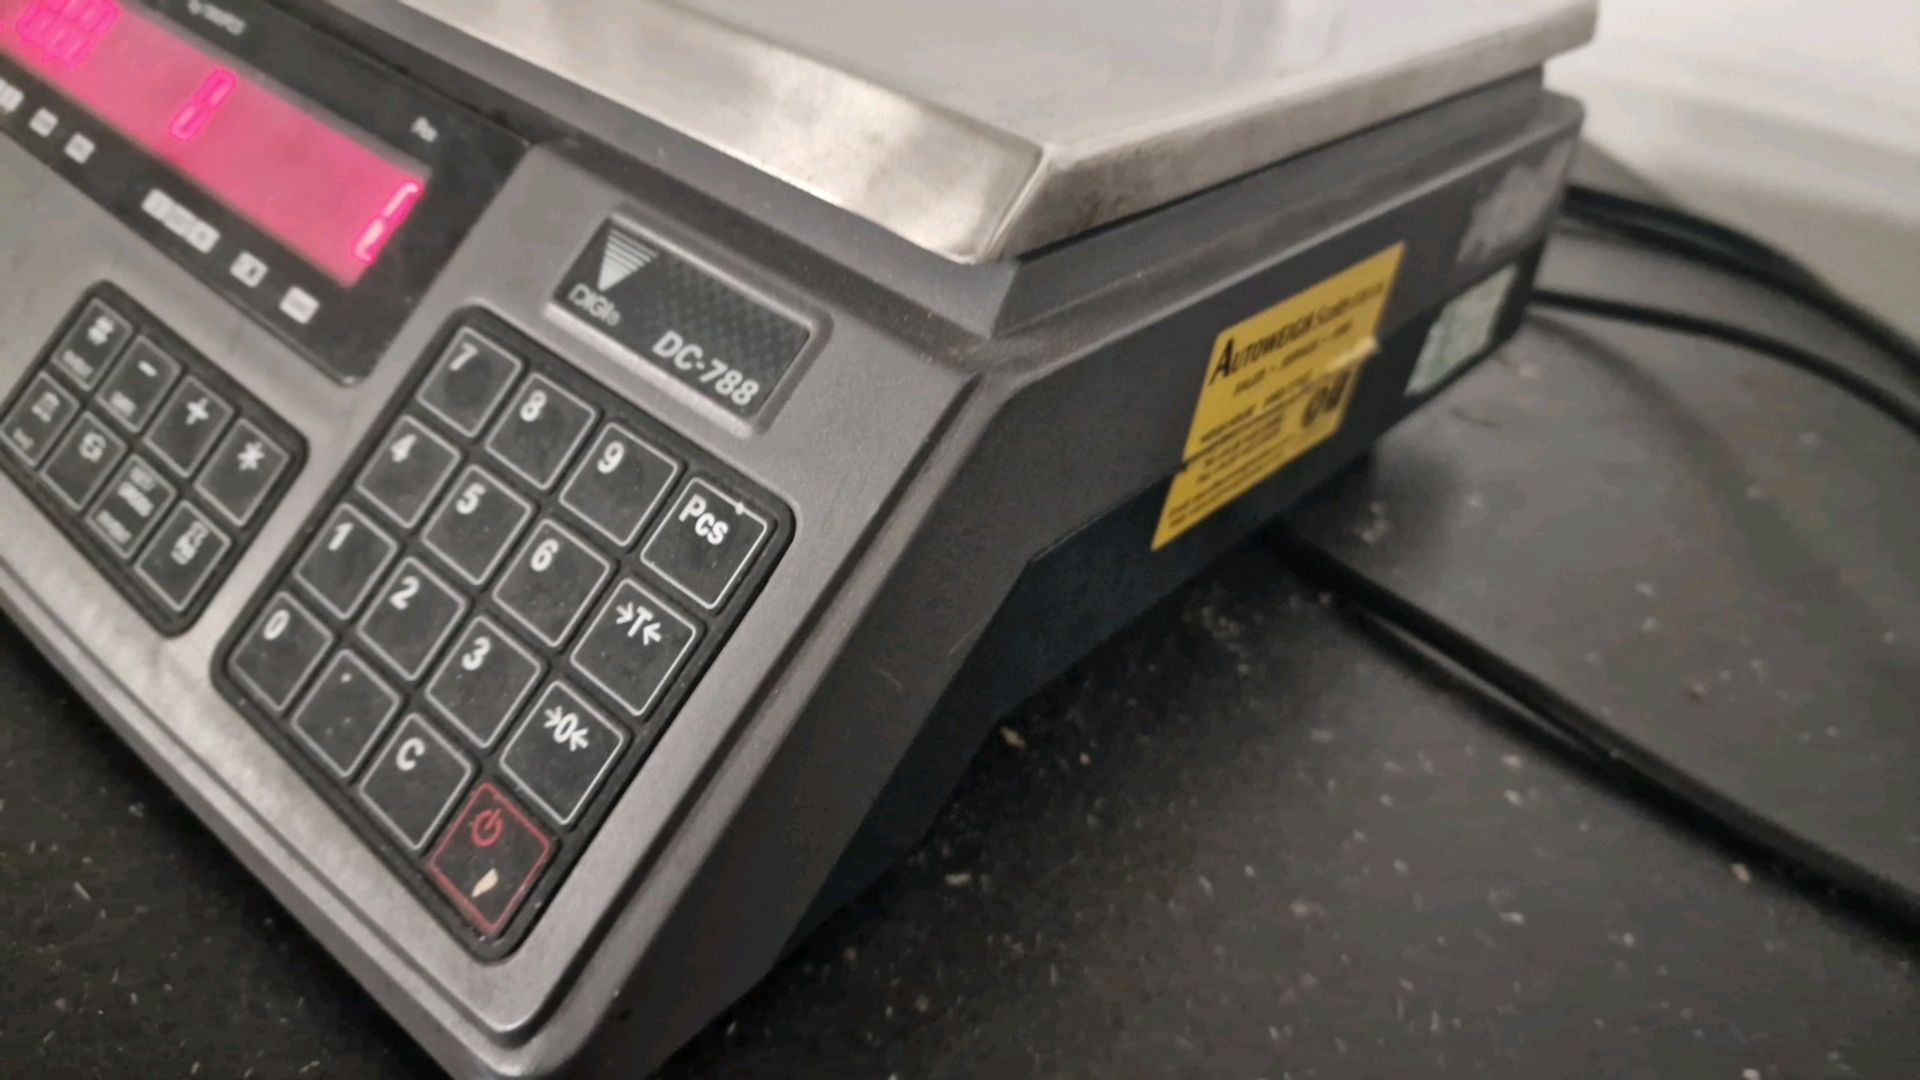 Digi DC788 Counting Scales - Image 2 of 4